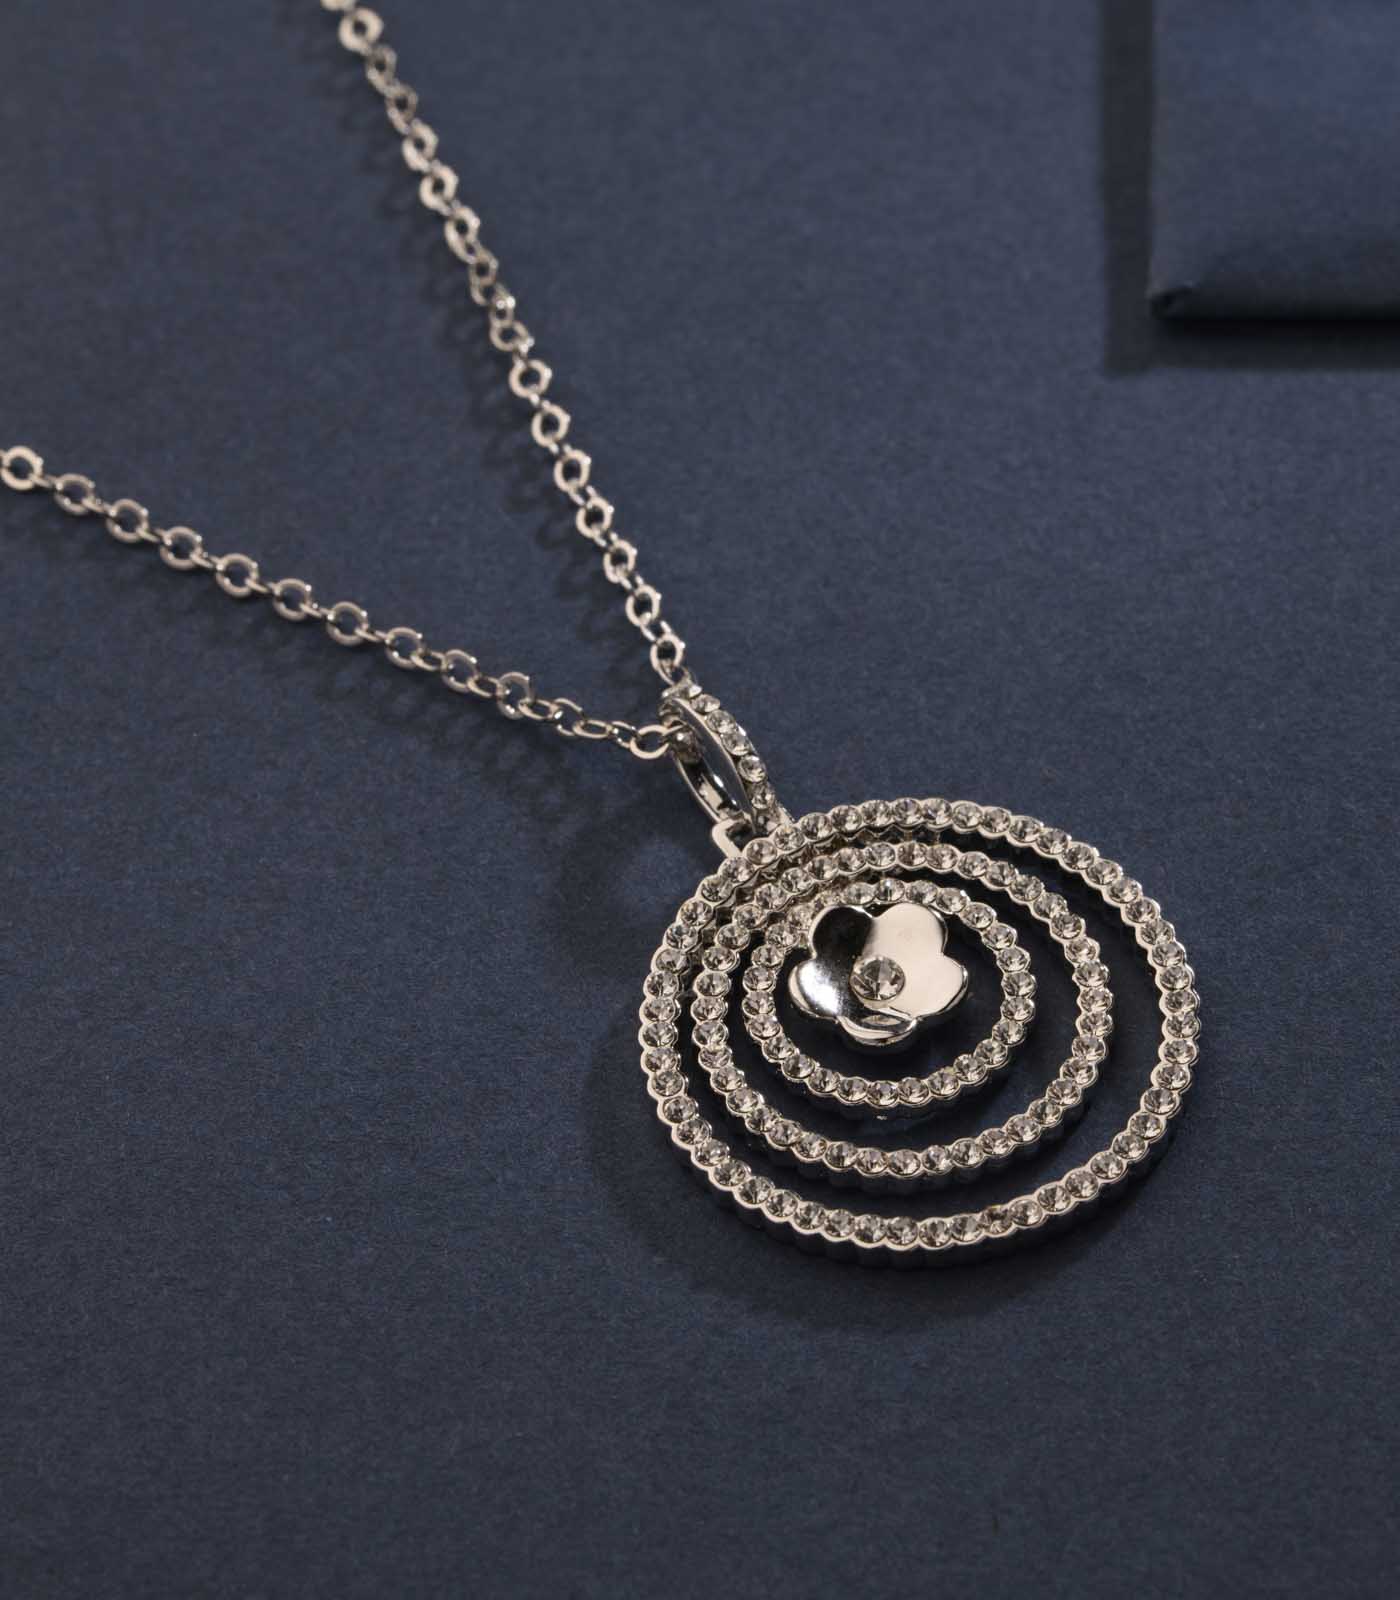 Decorative Concentric Loops Of Silver Flower Necklace (Brass)